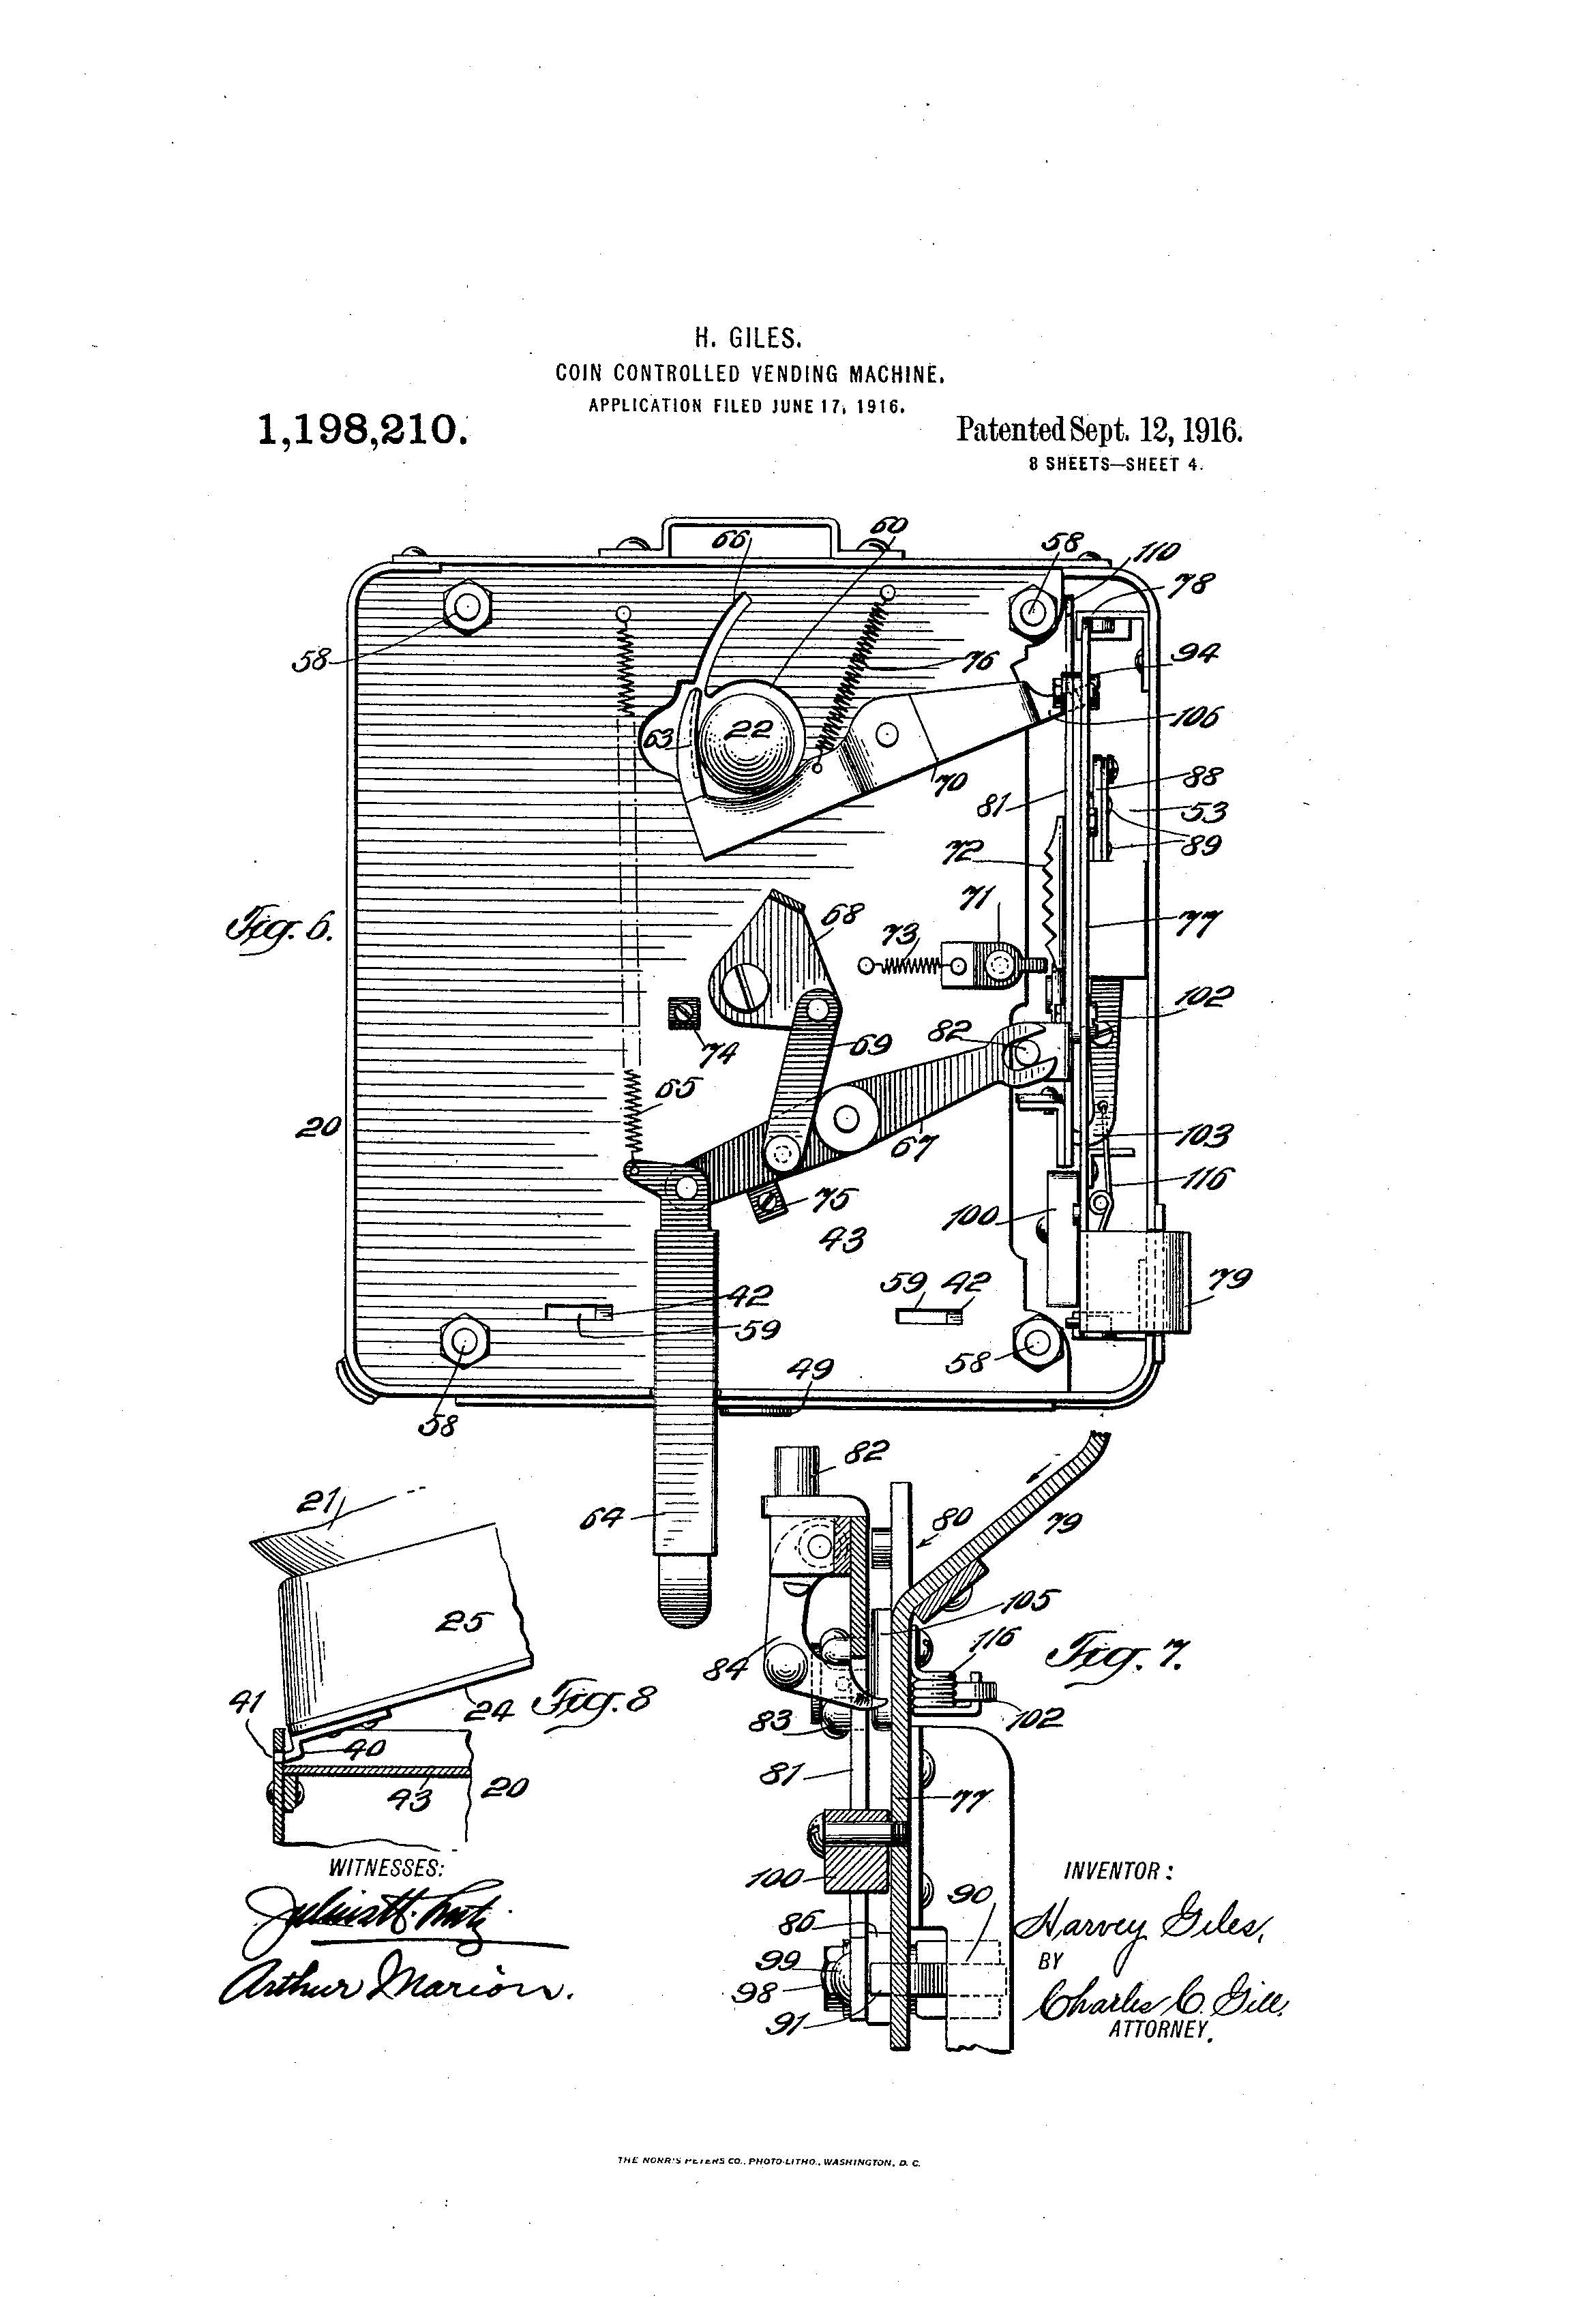 patent-illustration-coin-controlled-vending-machine_page_4